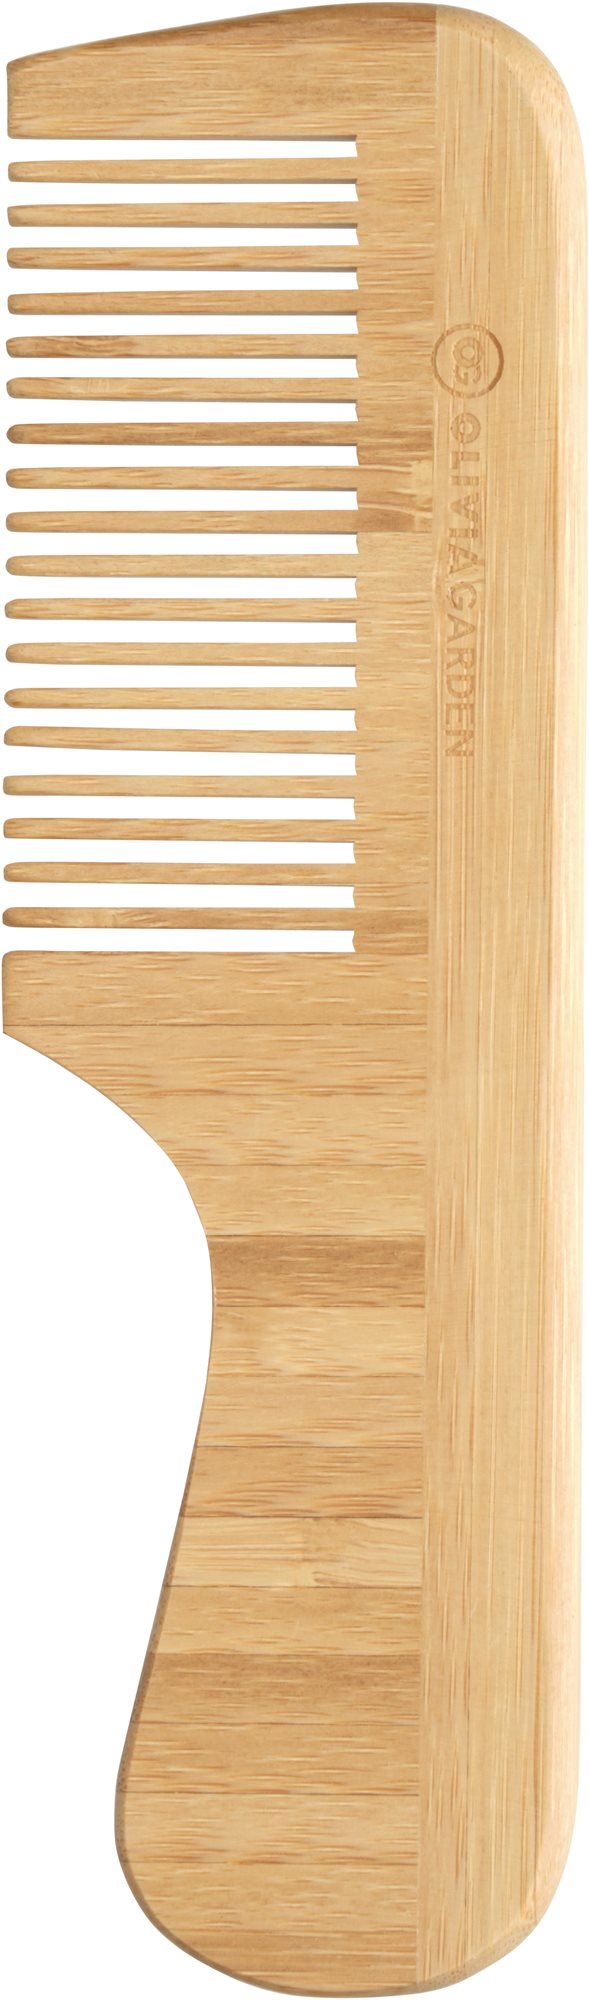 OLIVIA GARDEN Bamboo Touch Comb 3